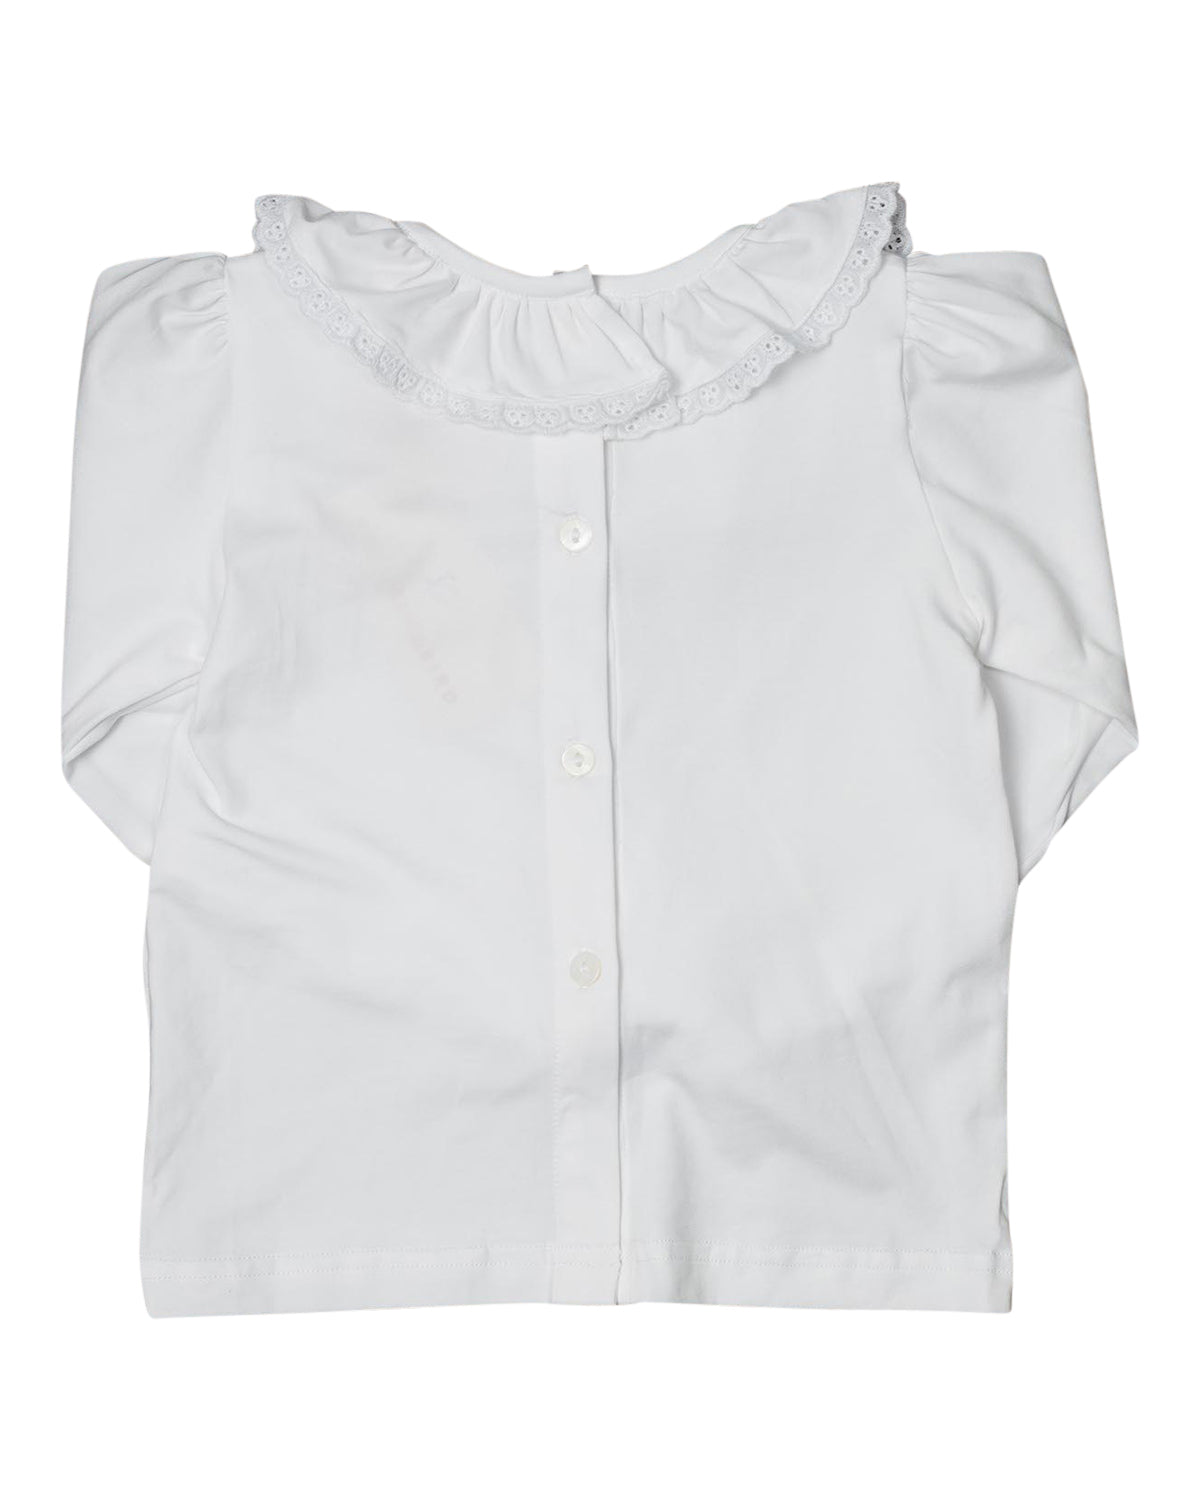 White Ruffle Blouse With Long Sleeves